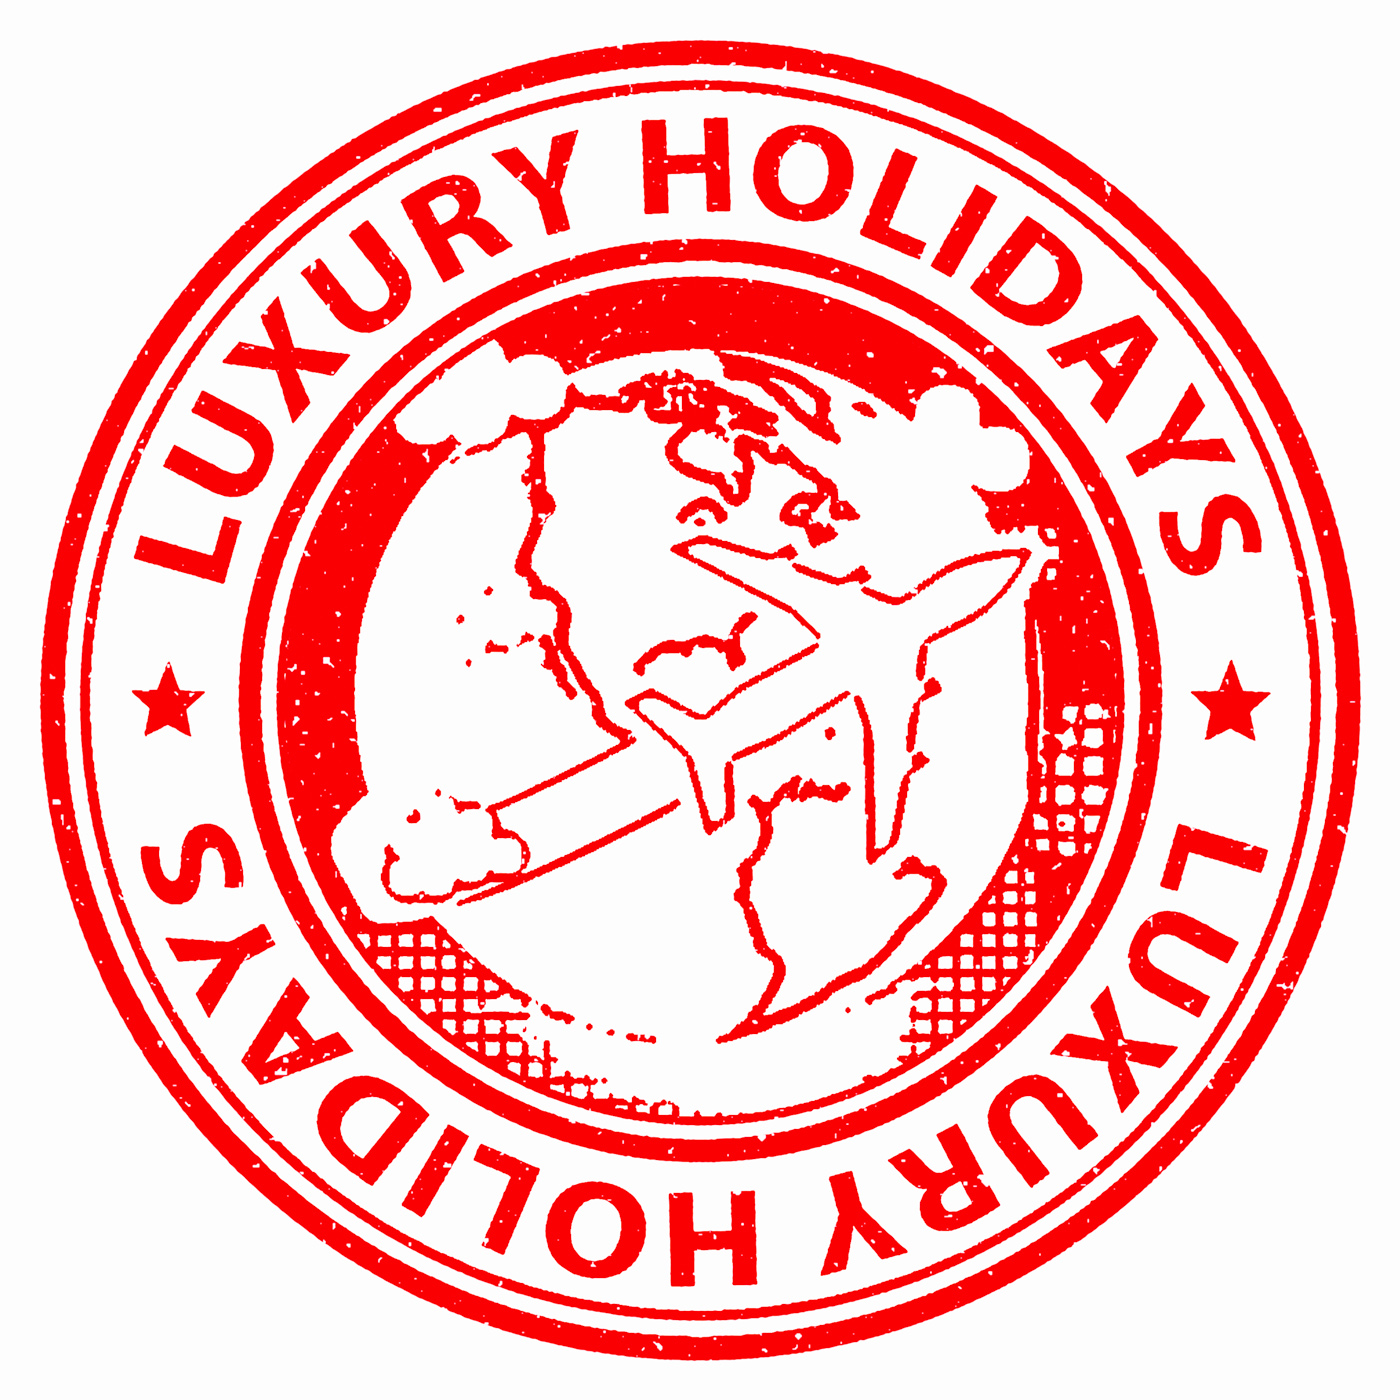 Luxury holidays means high quality and break photo